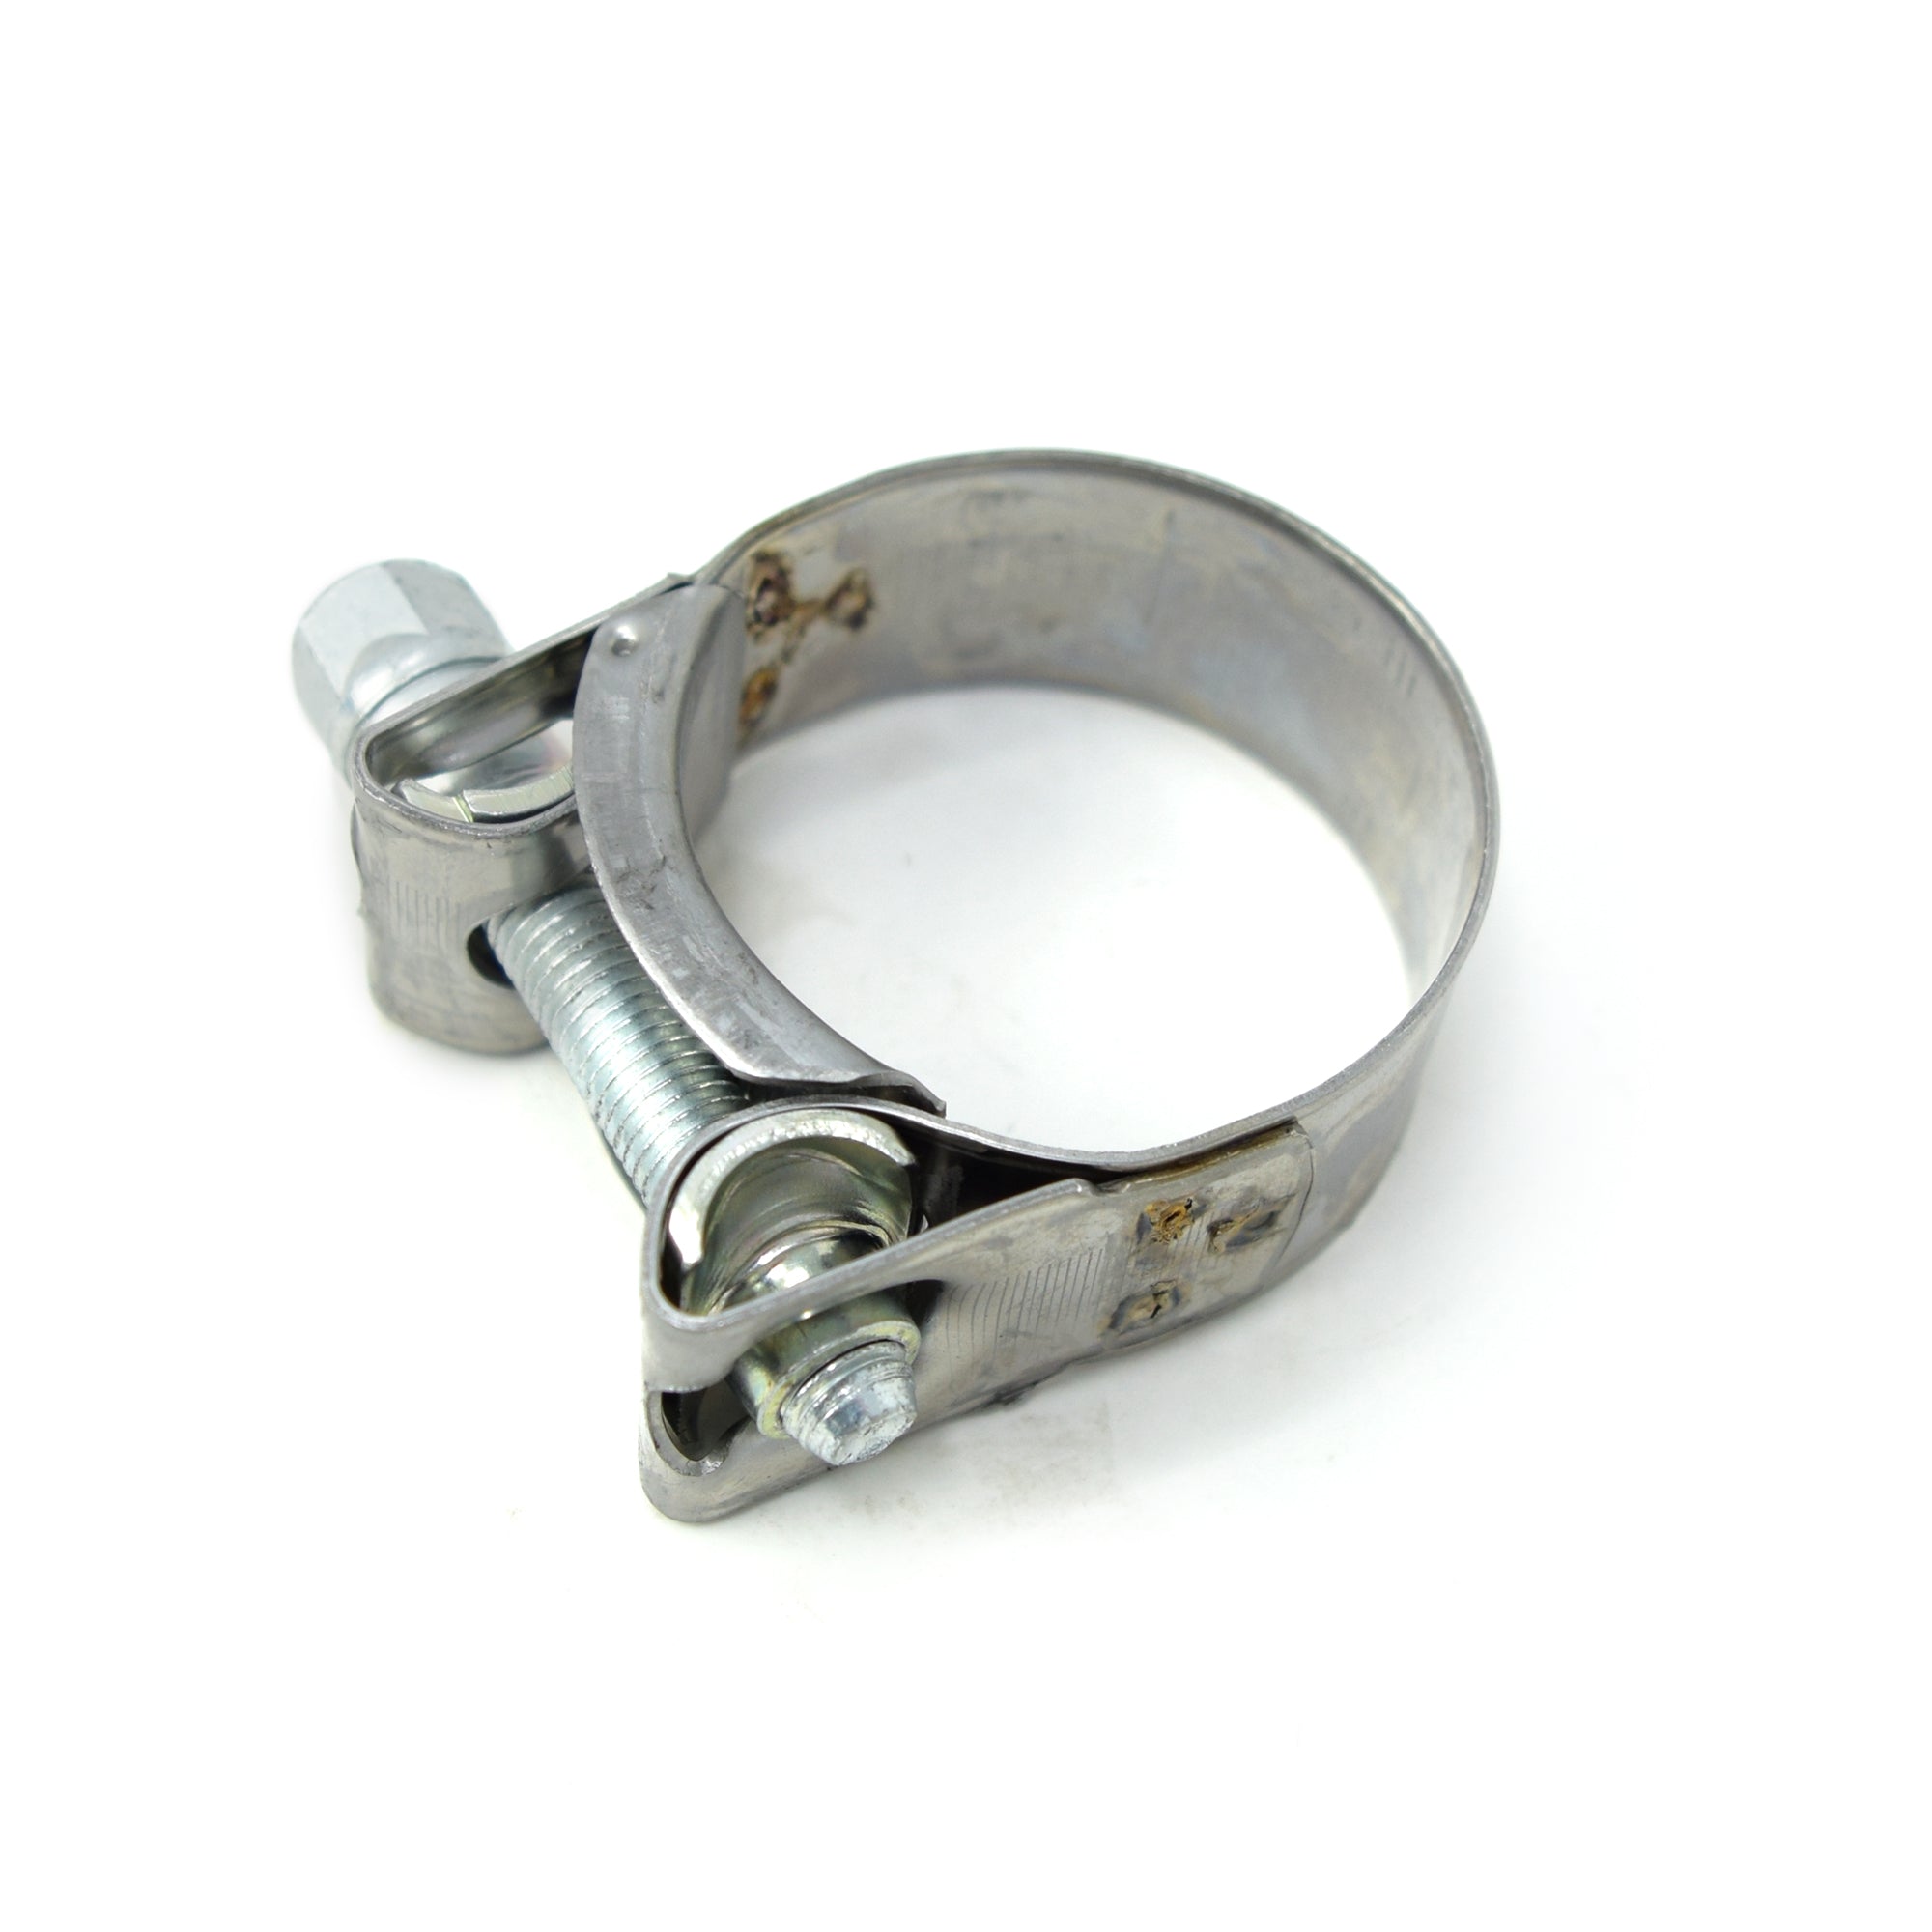 Stainless Exhaust Clamp Since July 2011